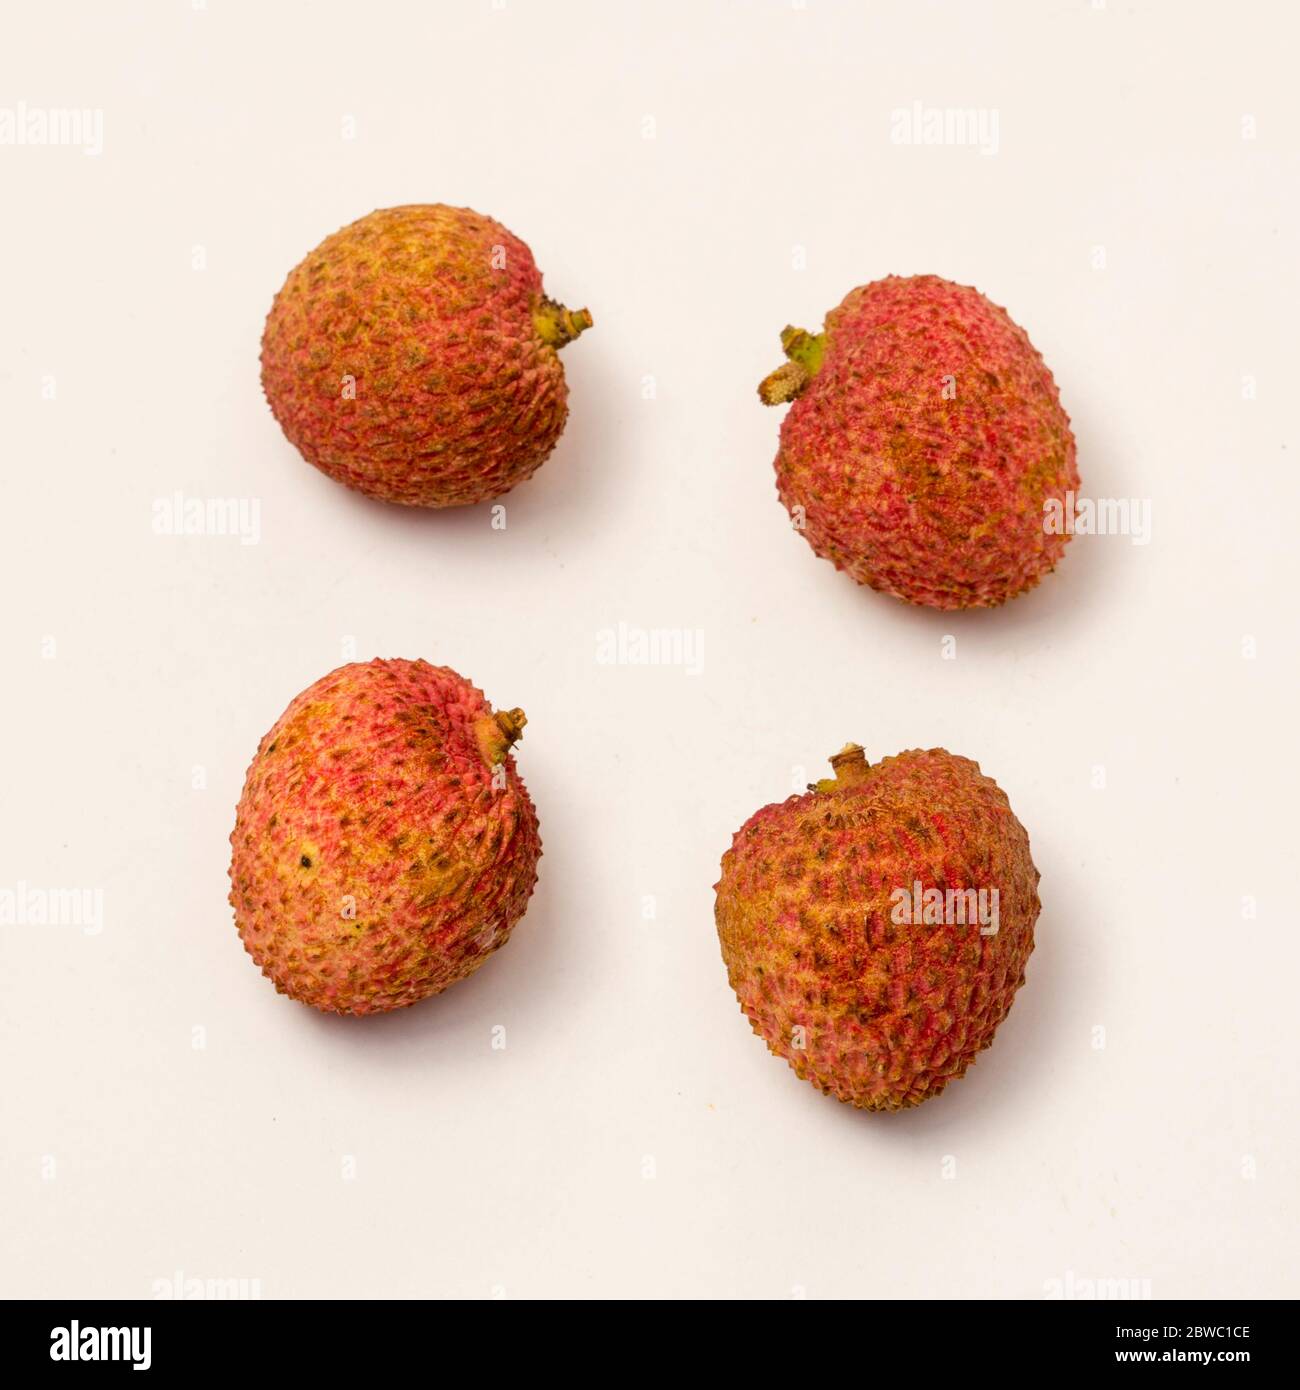 Close-up view of ripe lychee on white background. Stock Photo